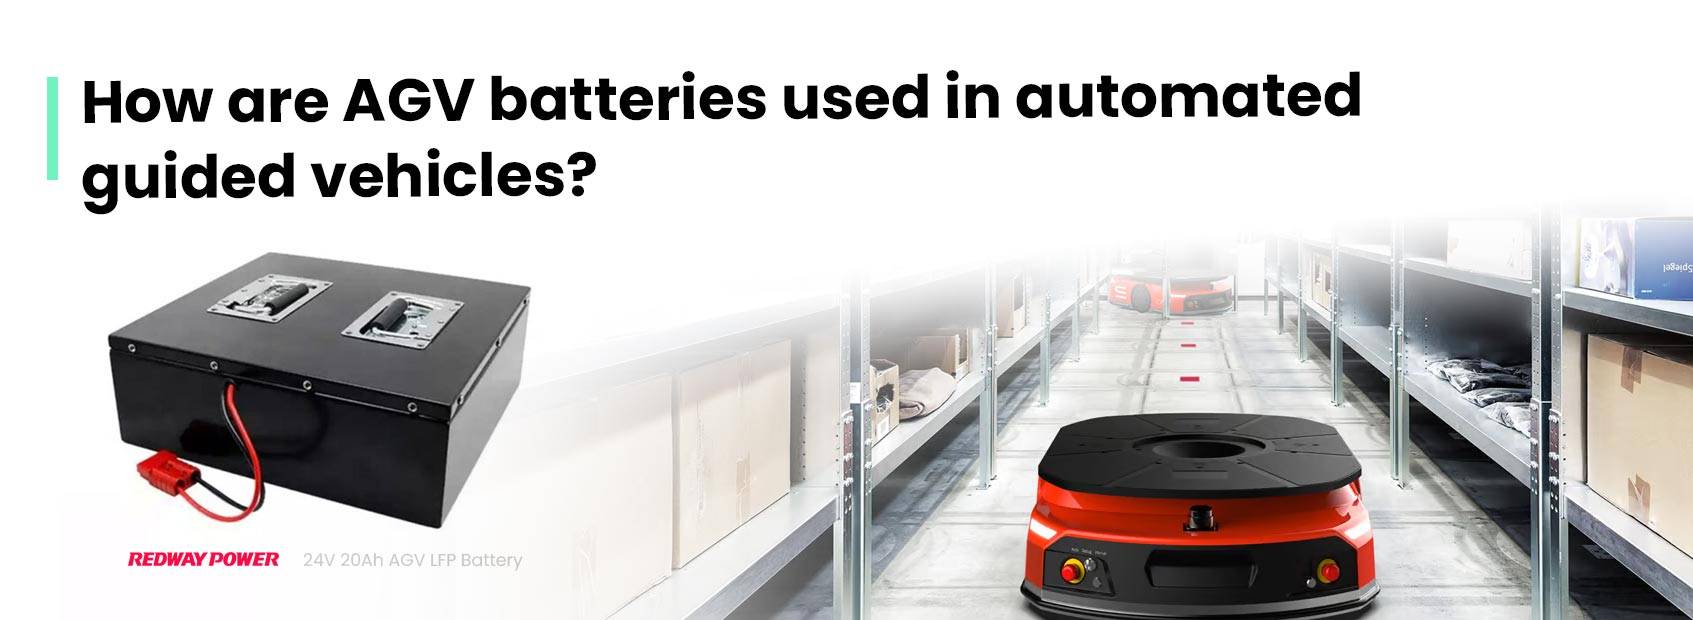 How are AGV batteries used in automated guided vehicles?